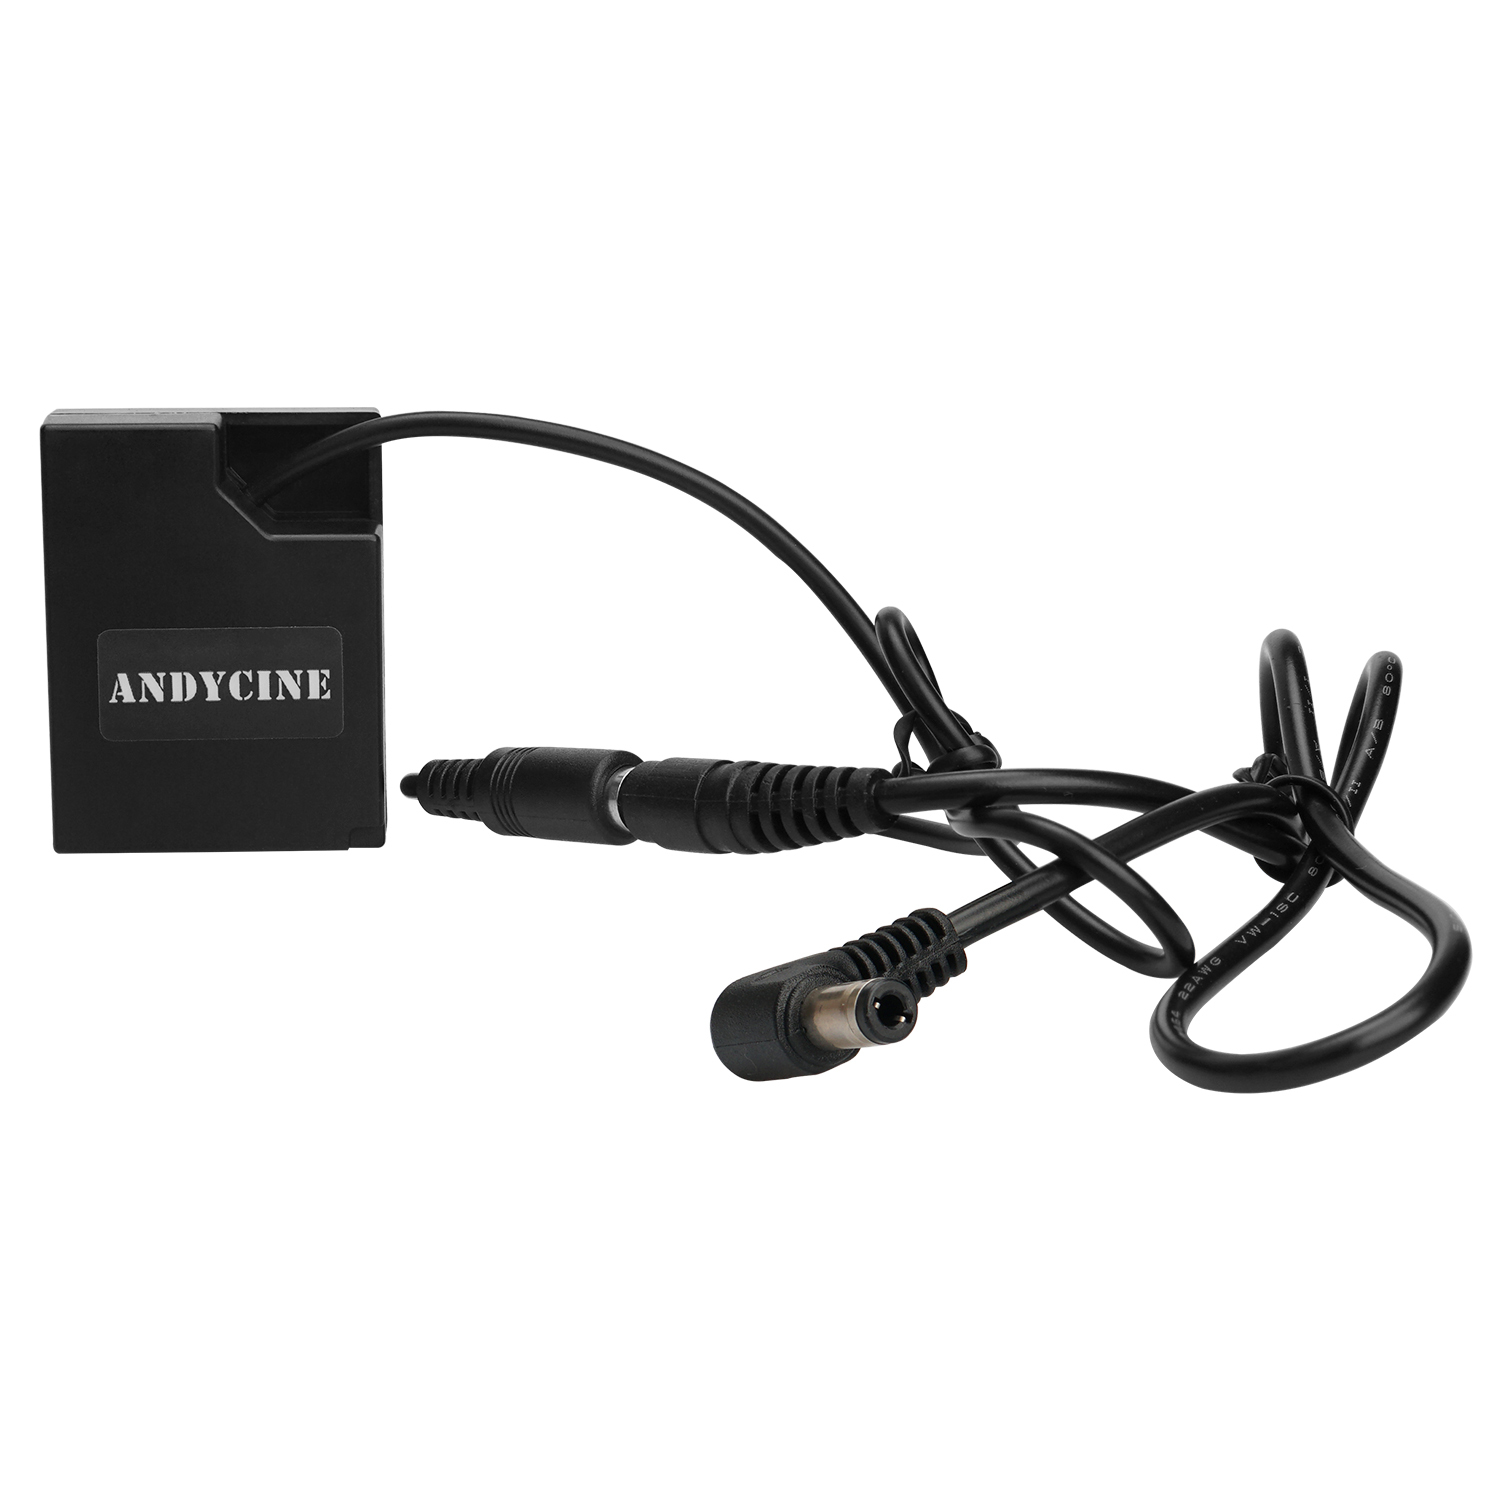 ANDYCINE CP-W126 DC Coupler NP-W126 Dummy Battery Power Adapter